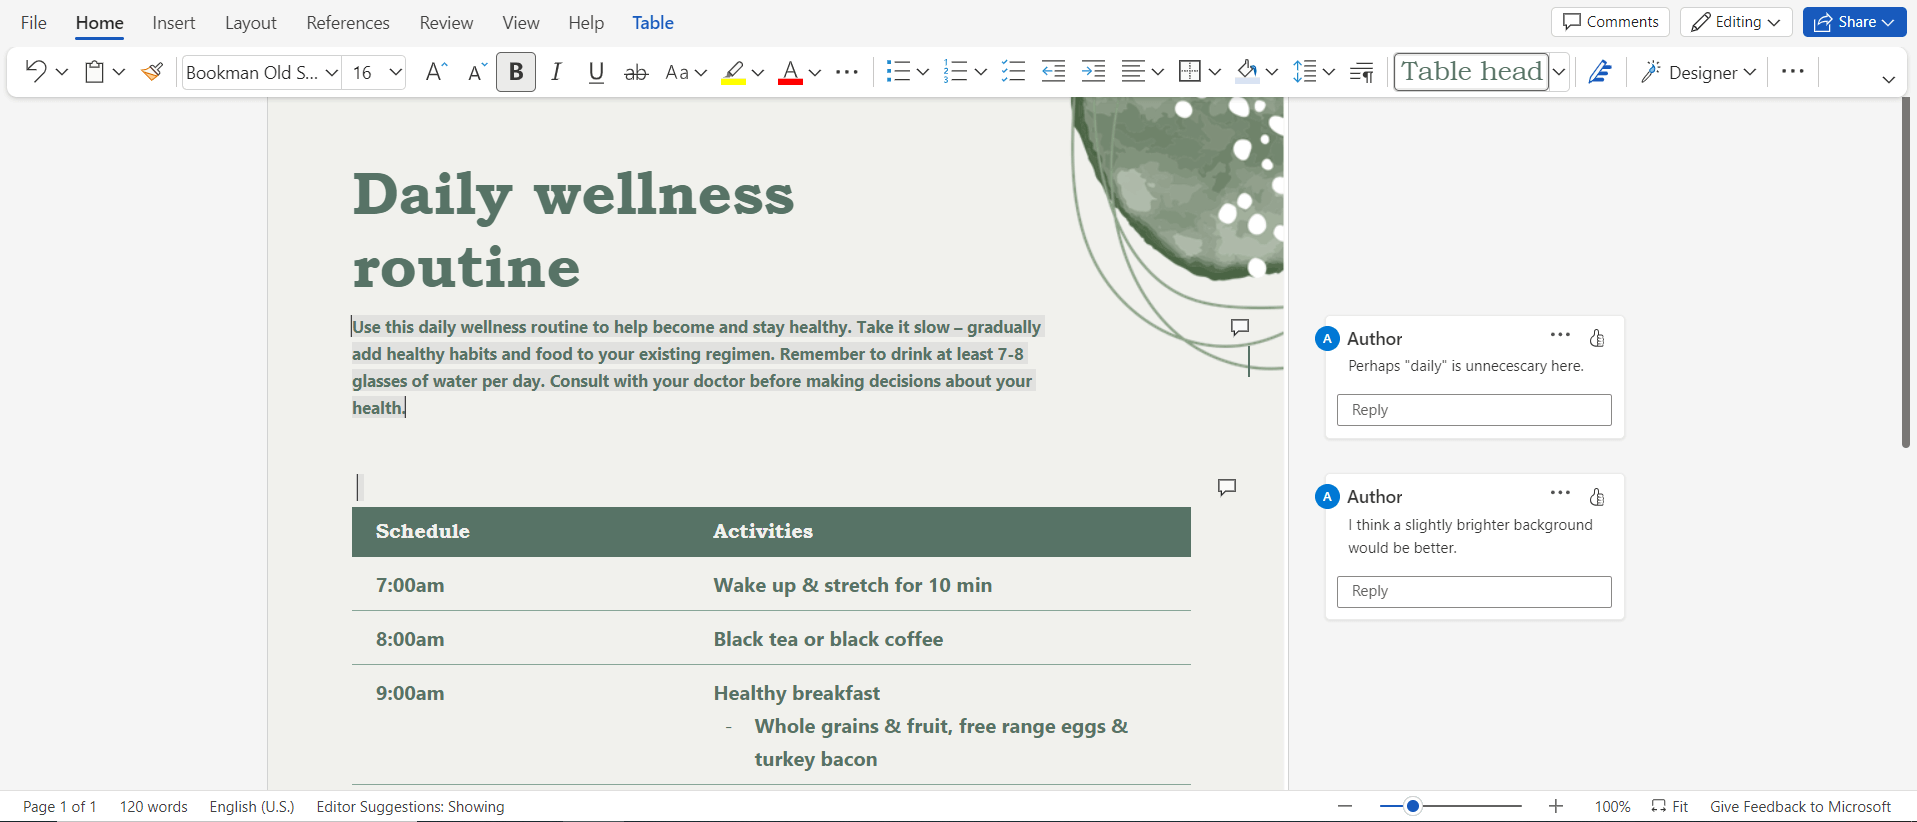 Microsoft Word document showing a daily wellness routine with a schedule and activities, including editor comments on word choice and background color.